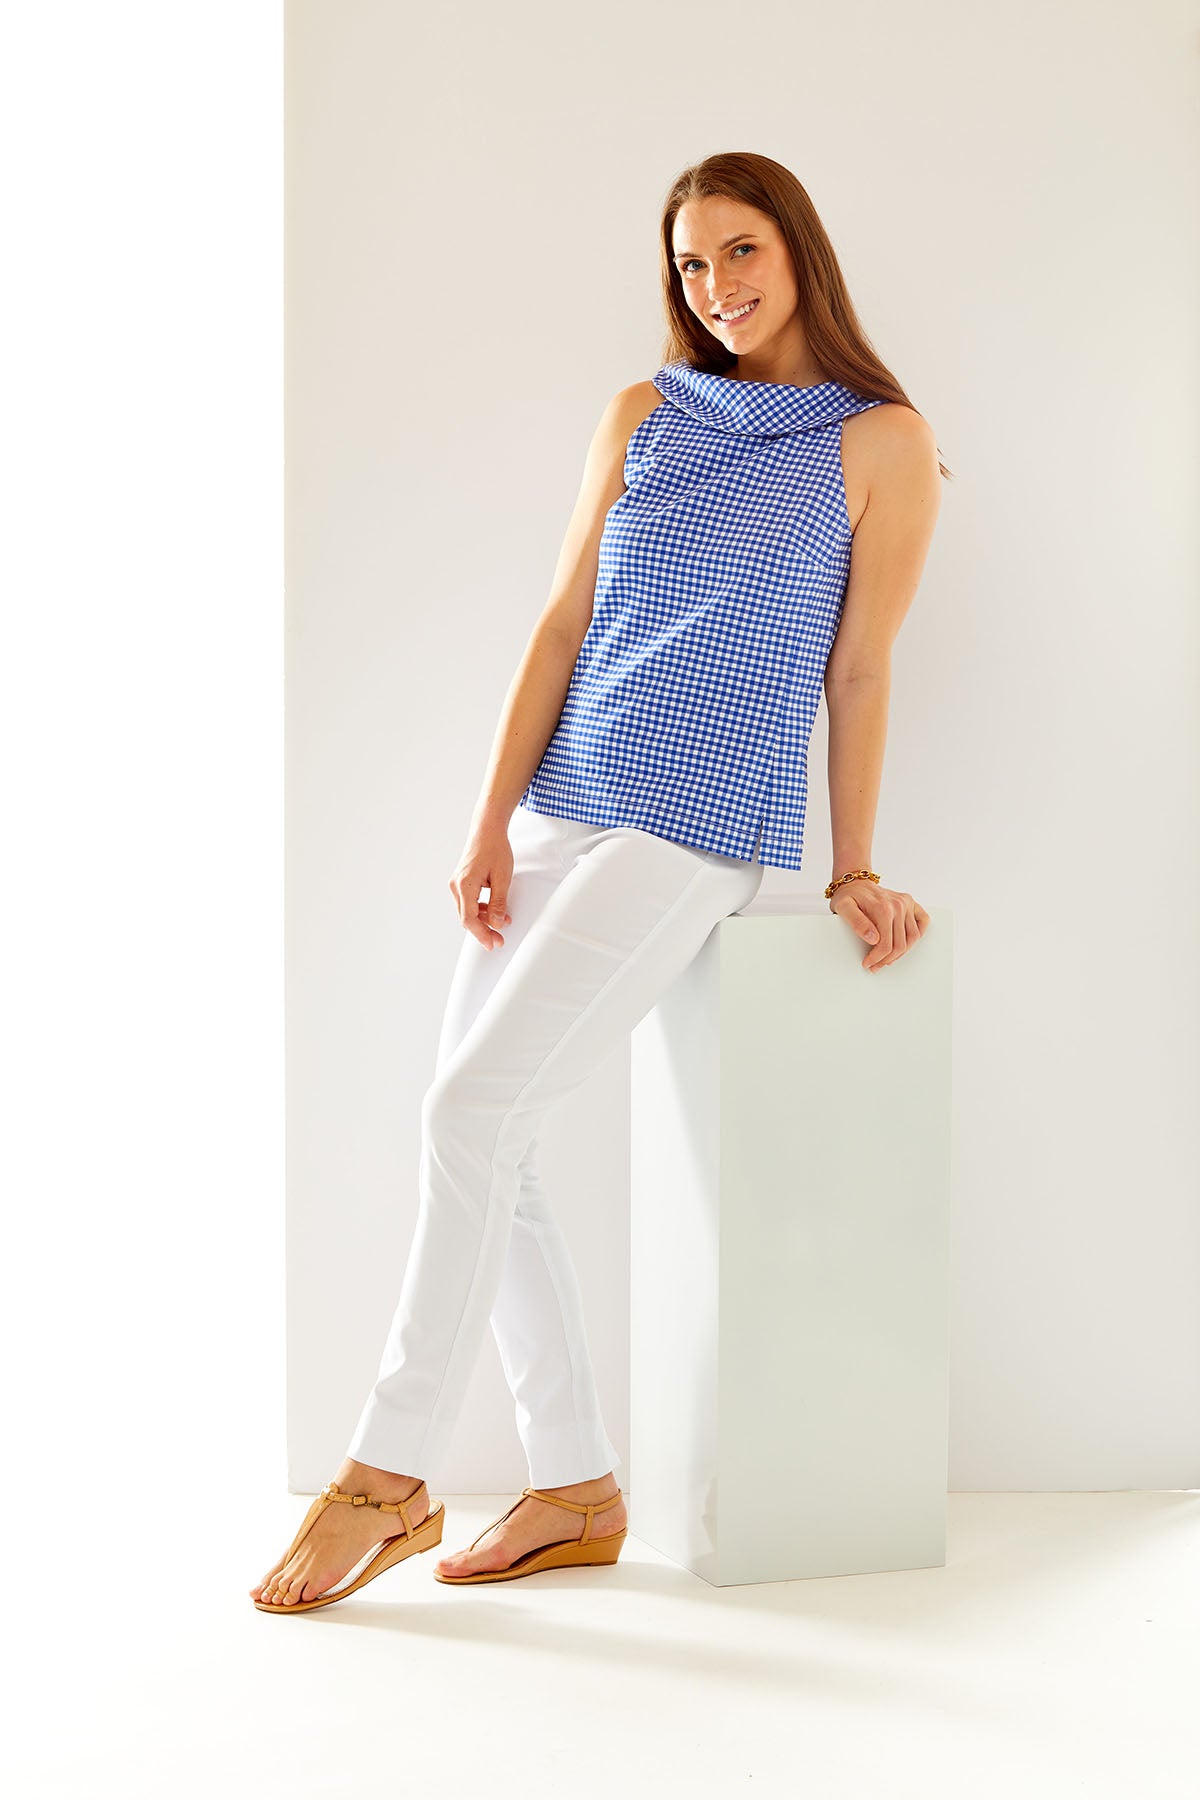 Woman in blue and white gingham top